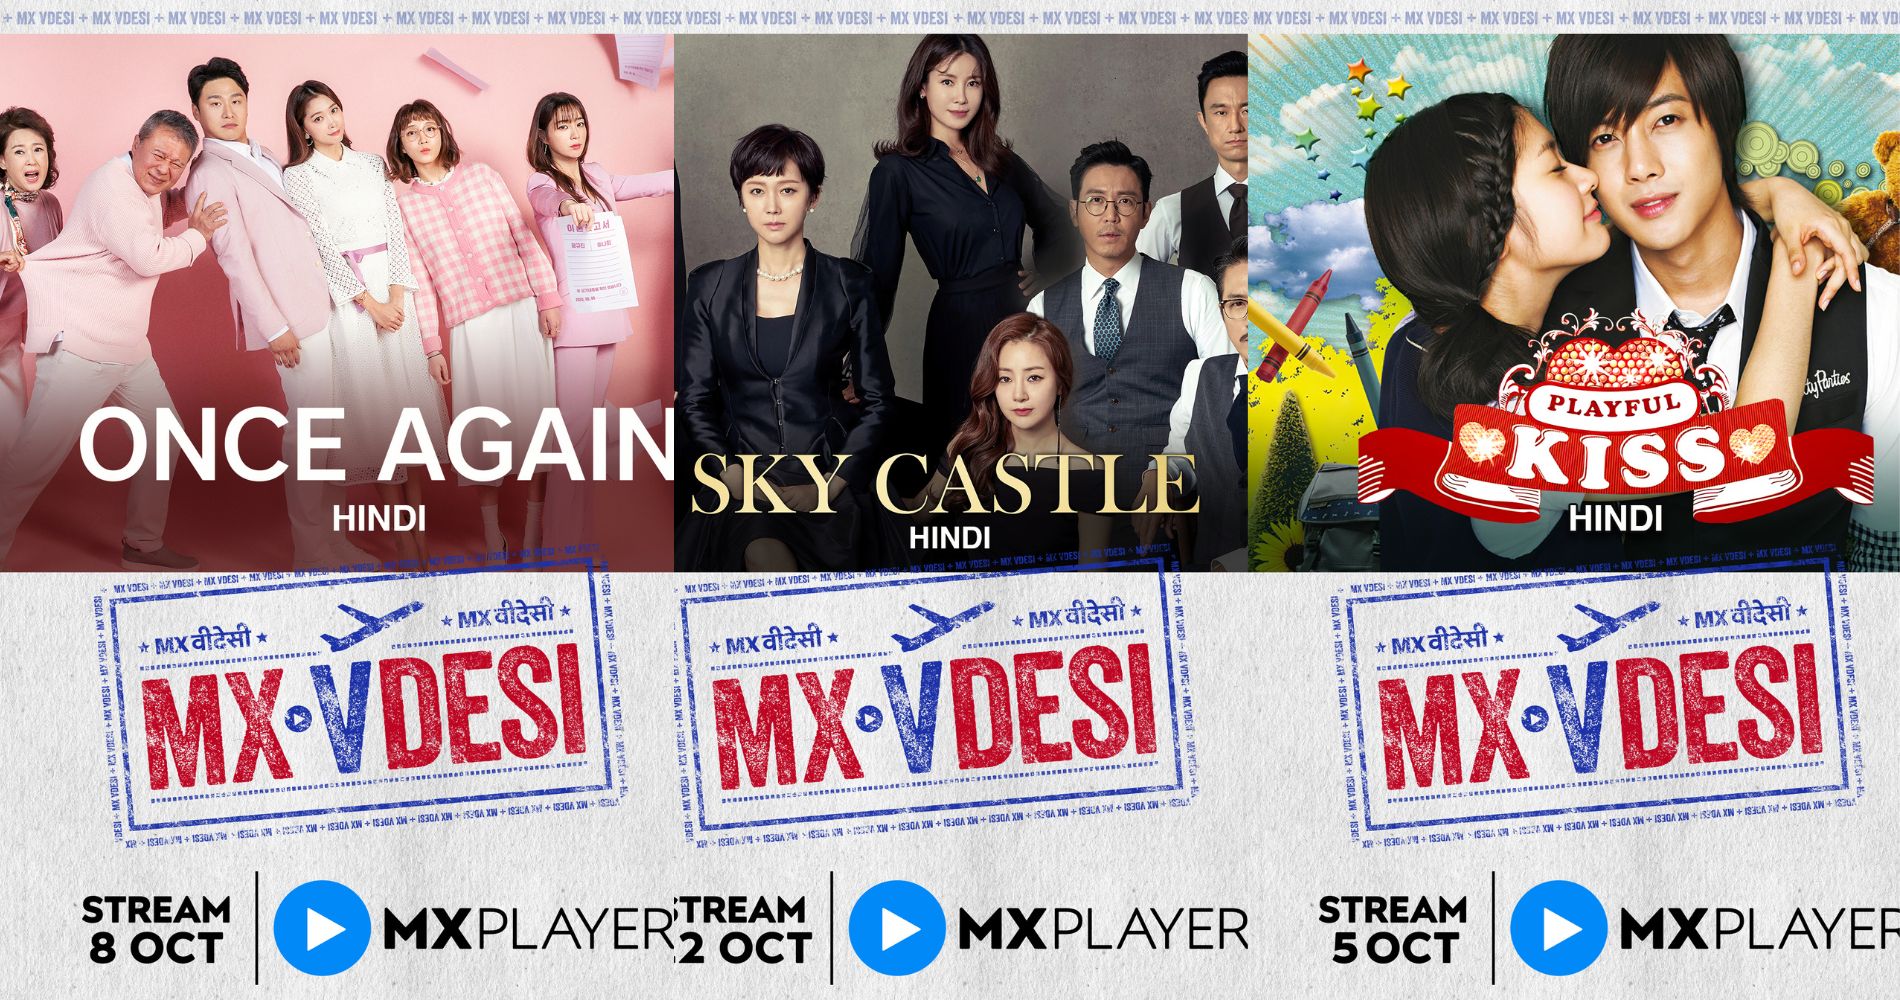 MX Player presents a huge festive bonanza with their October